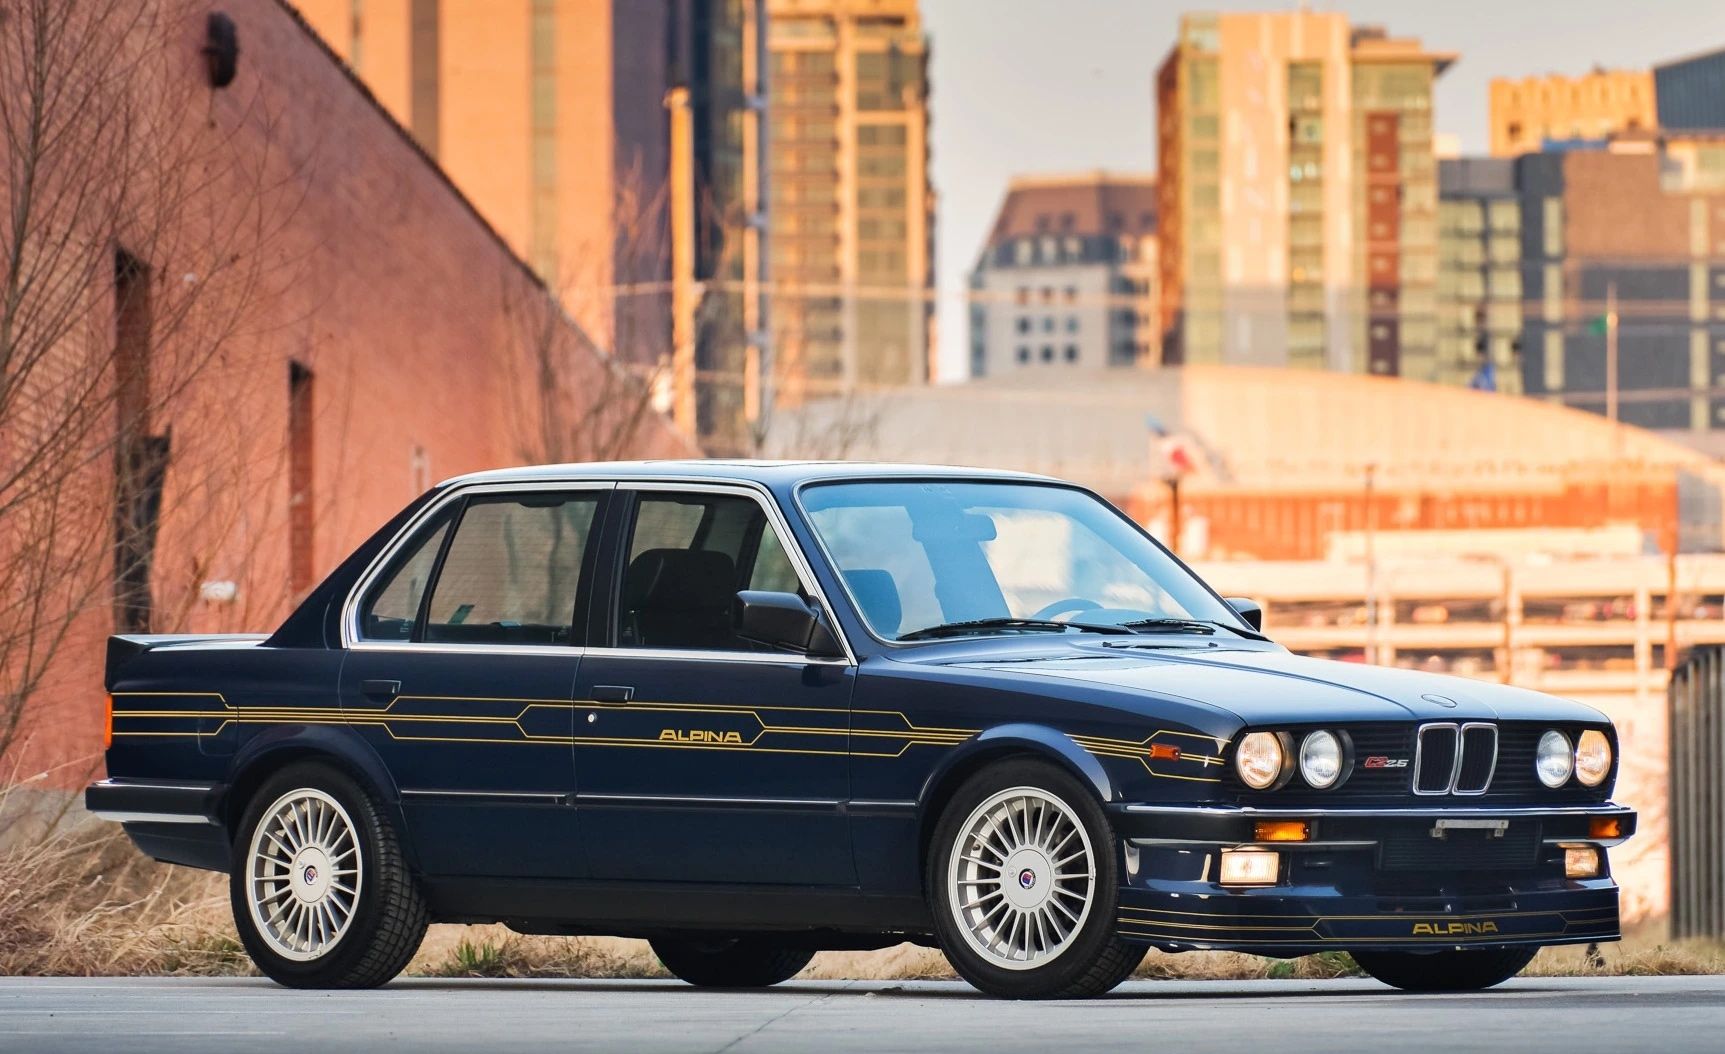 1986 BMW Alpina C2 2.5 Is Our Bring a Trailer Auction Pick of the Day